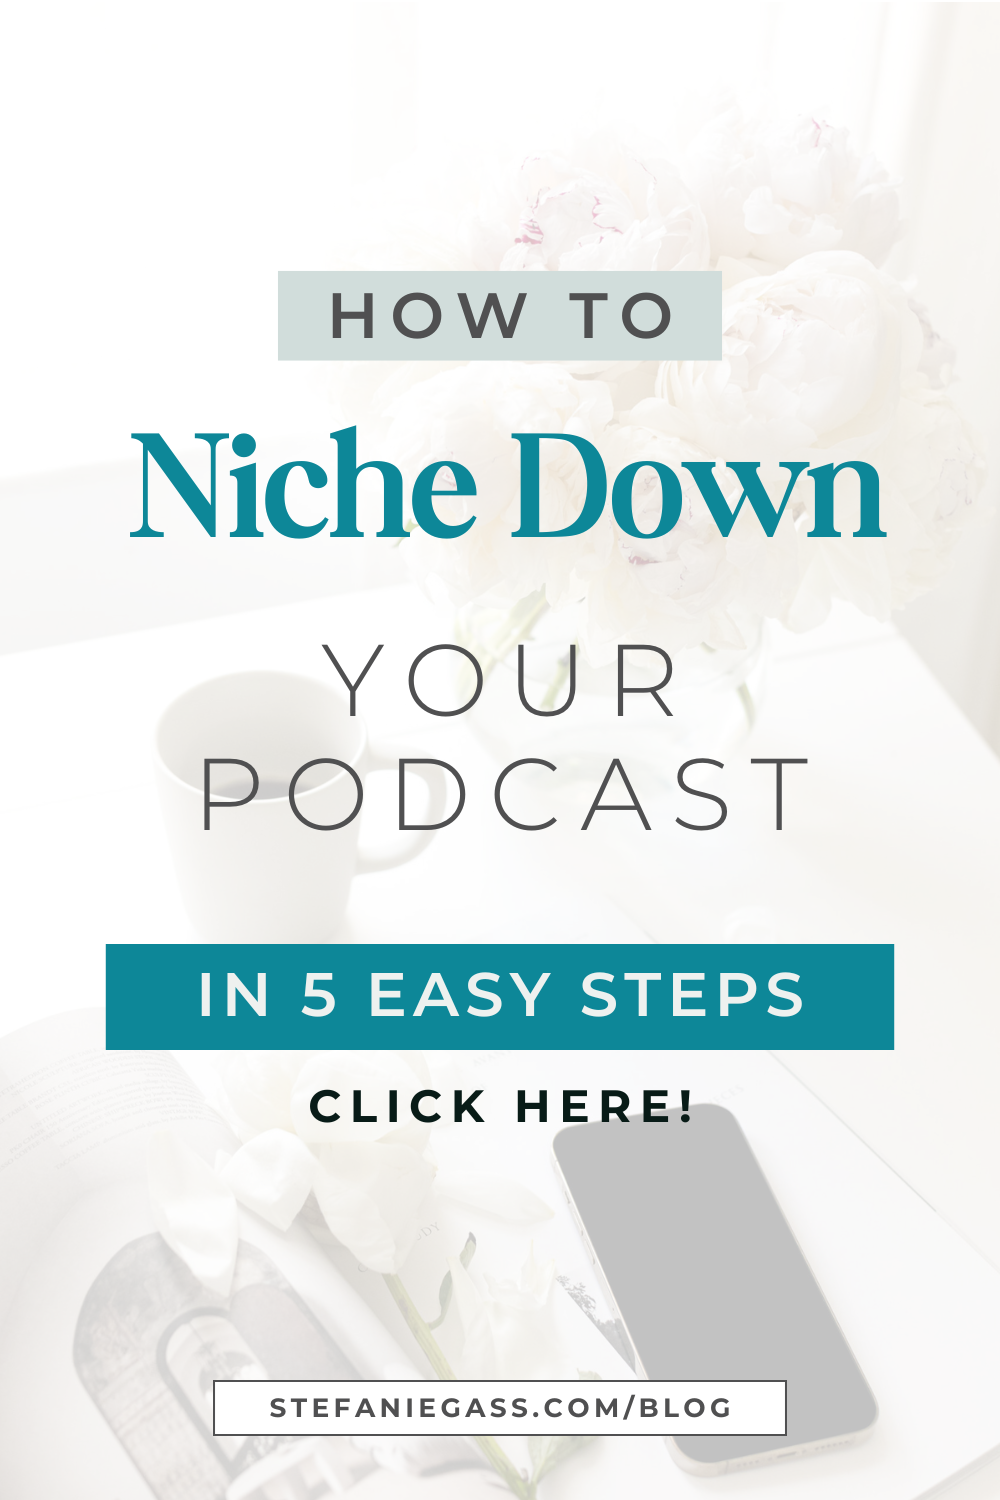 Text says "how to niche down your podcast in 5 easy steps."